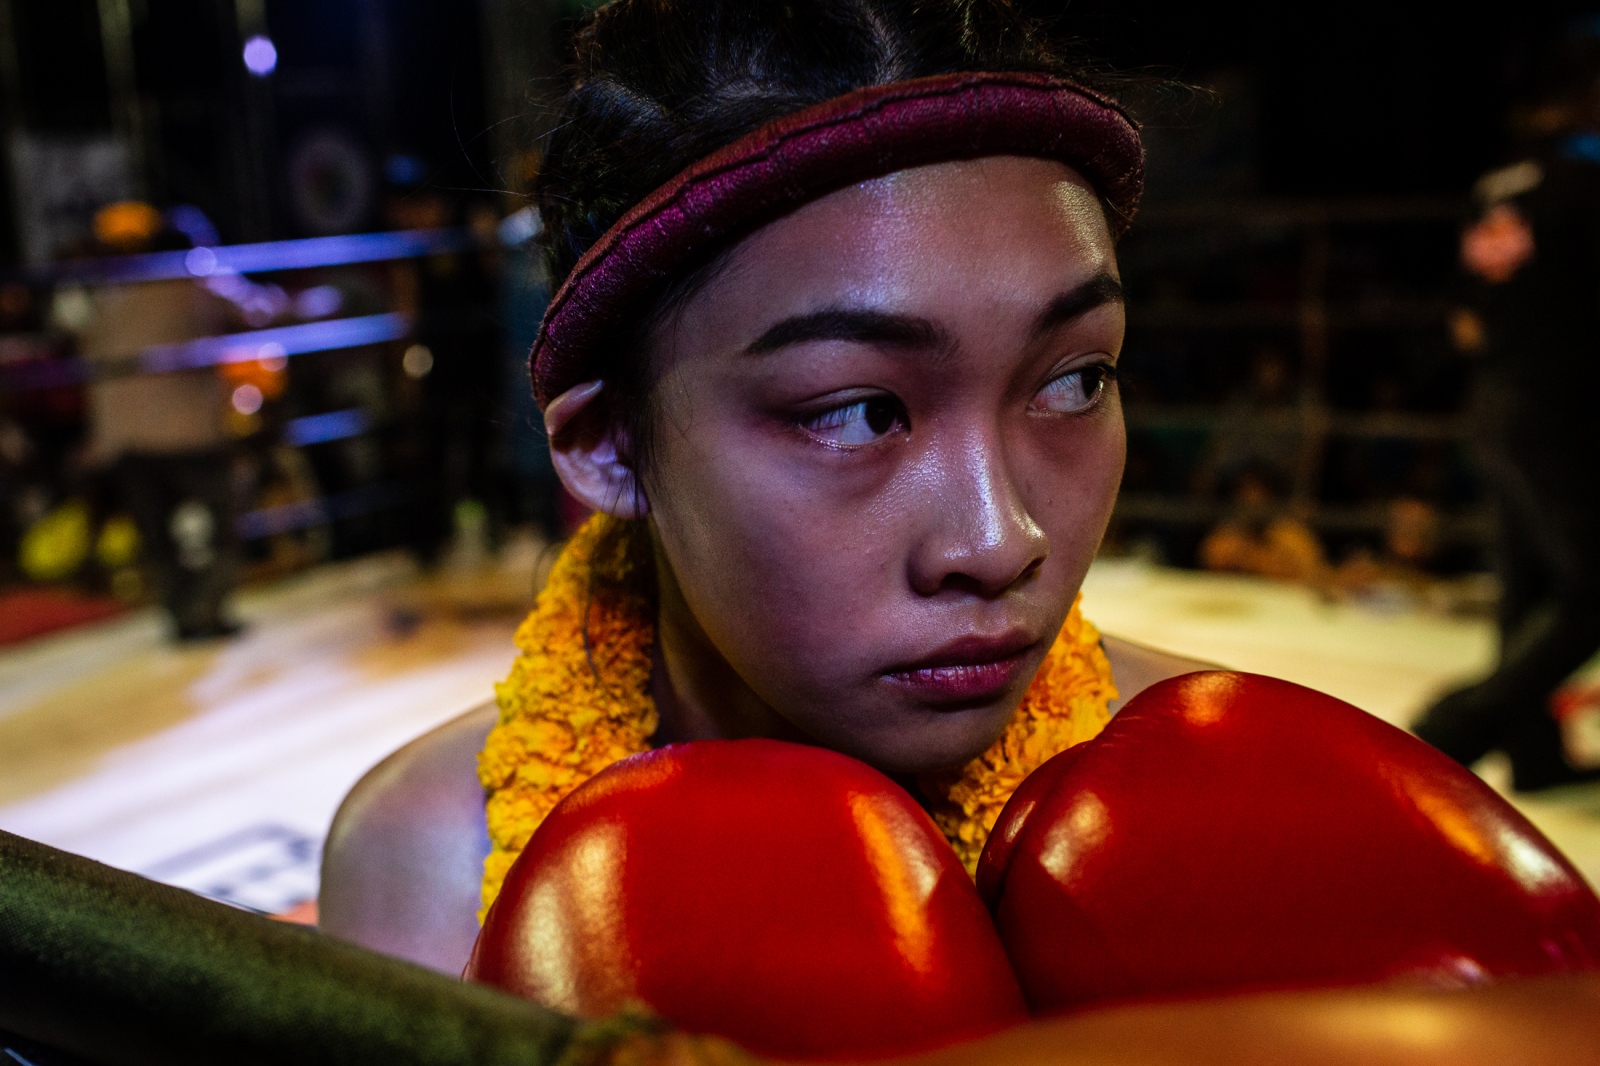 In the Ring | Buy this image